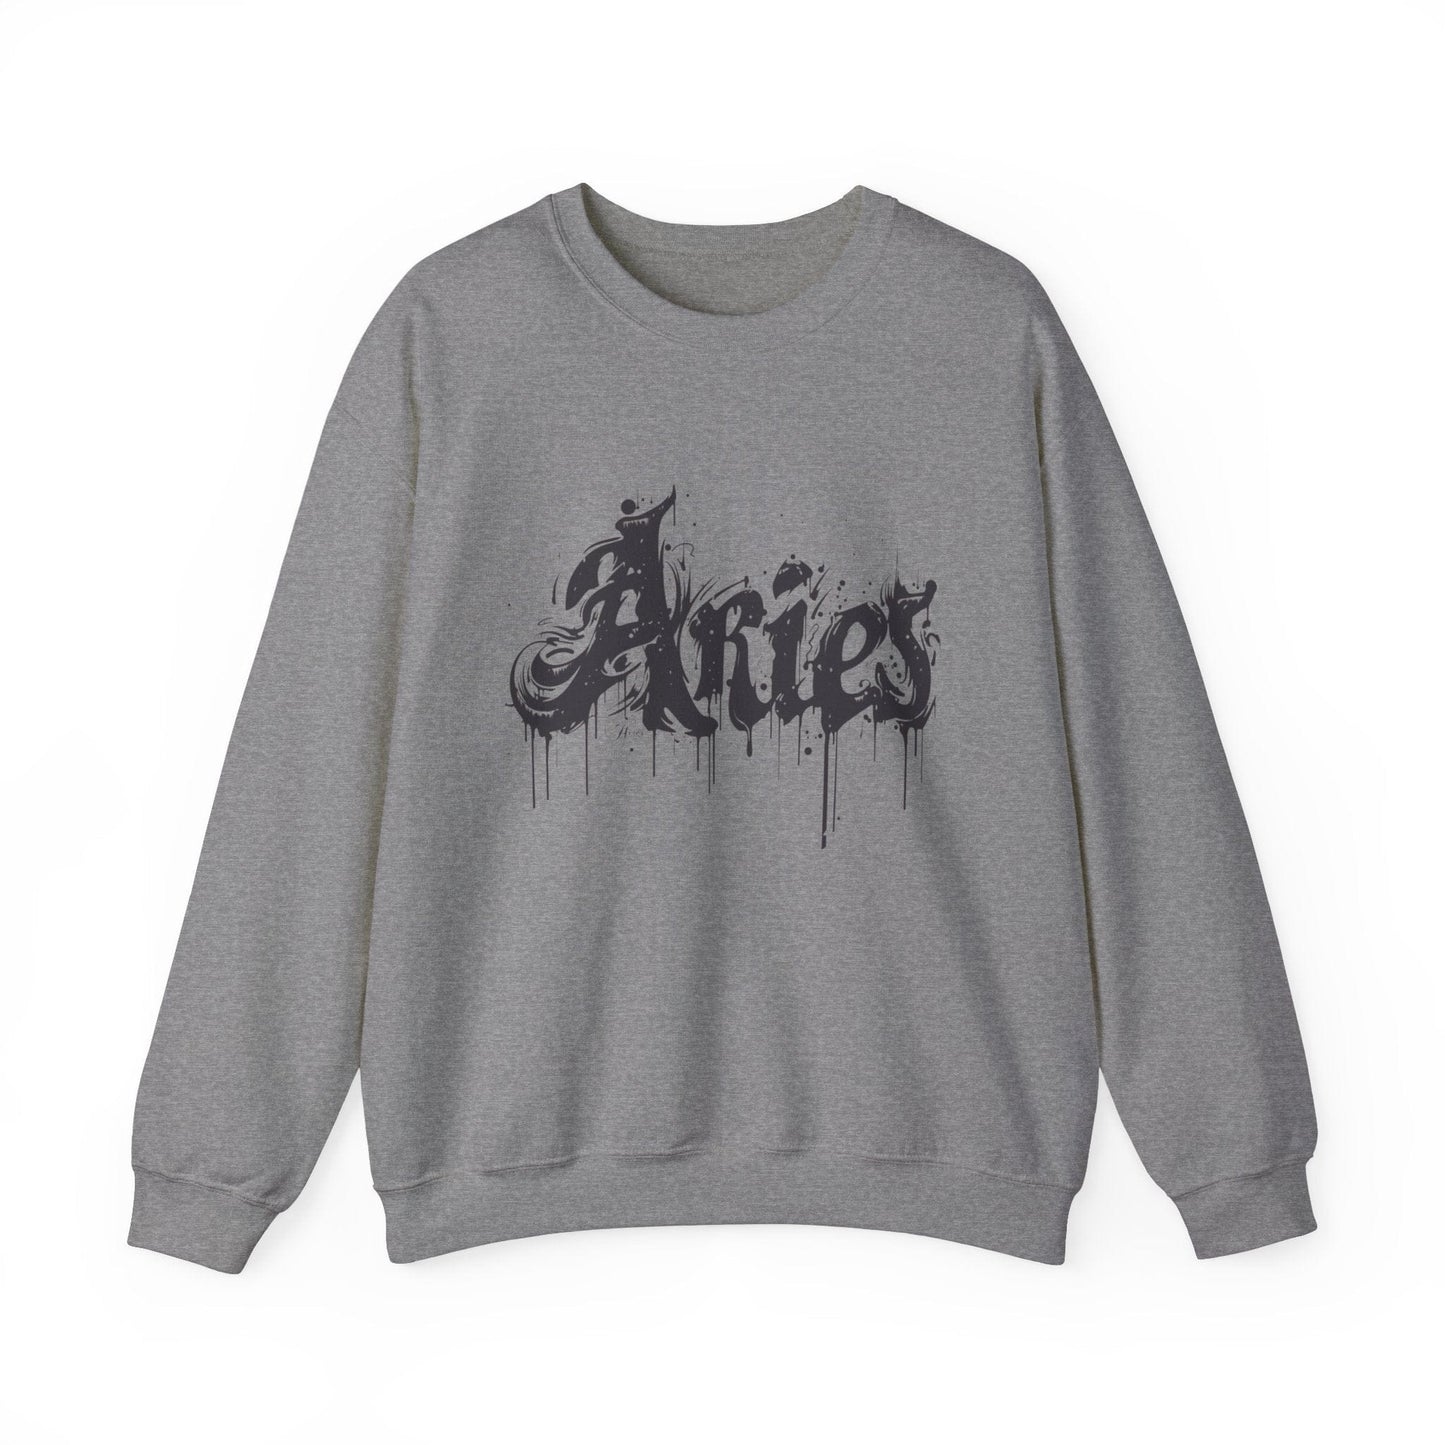 Sweatshirt S / Graphite Heather Ink-Dripped Aries Energy Soft Sweater: Embrace Your Fire